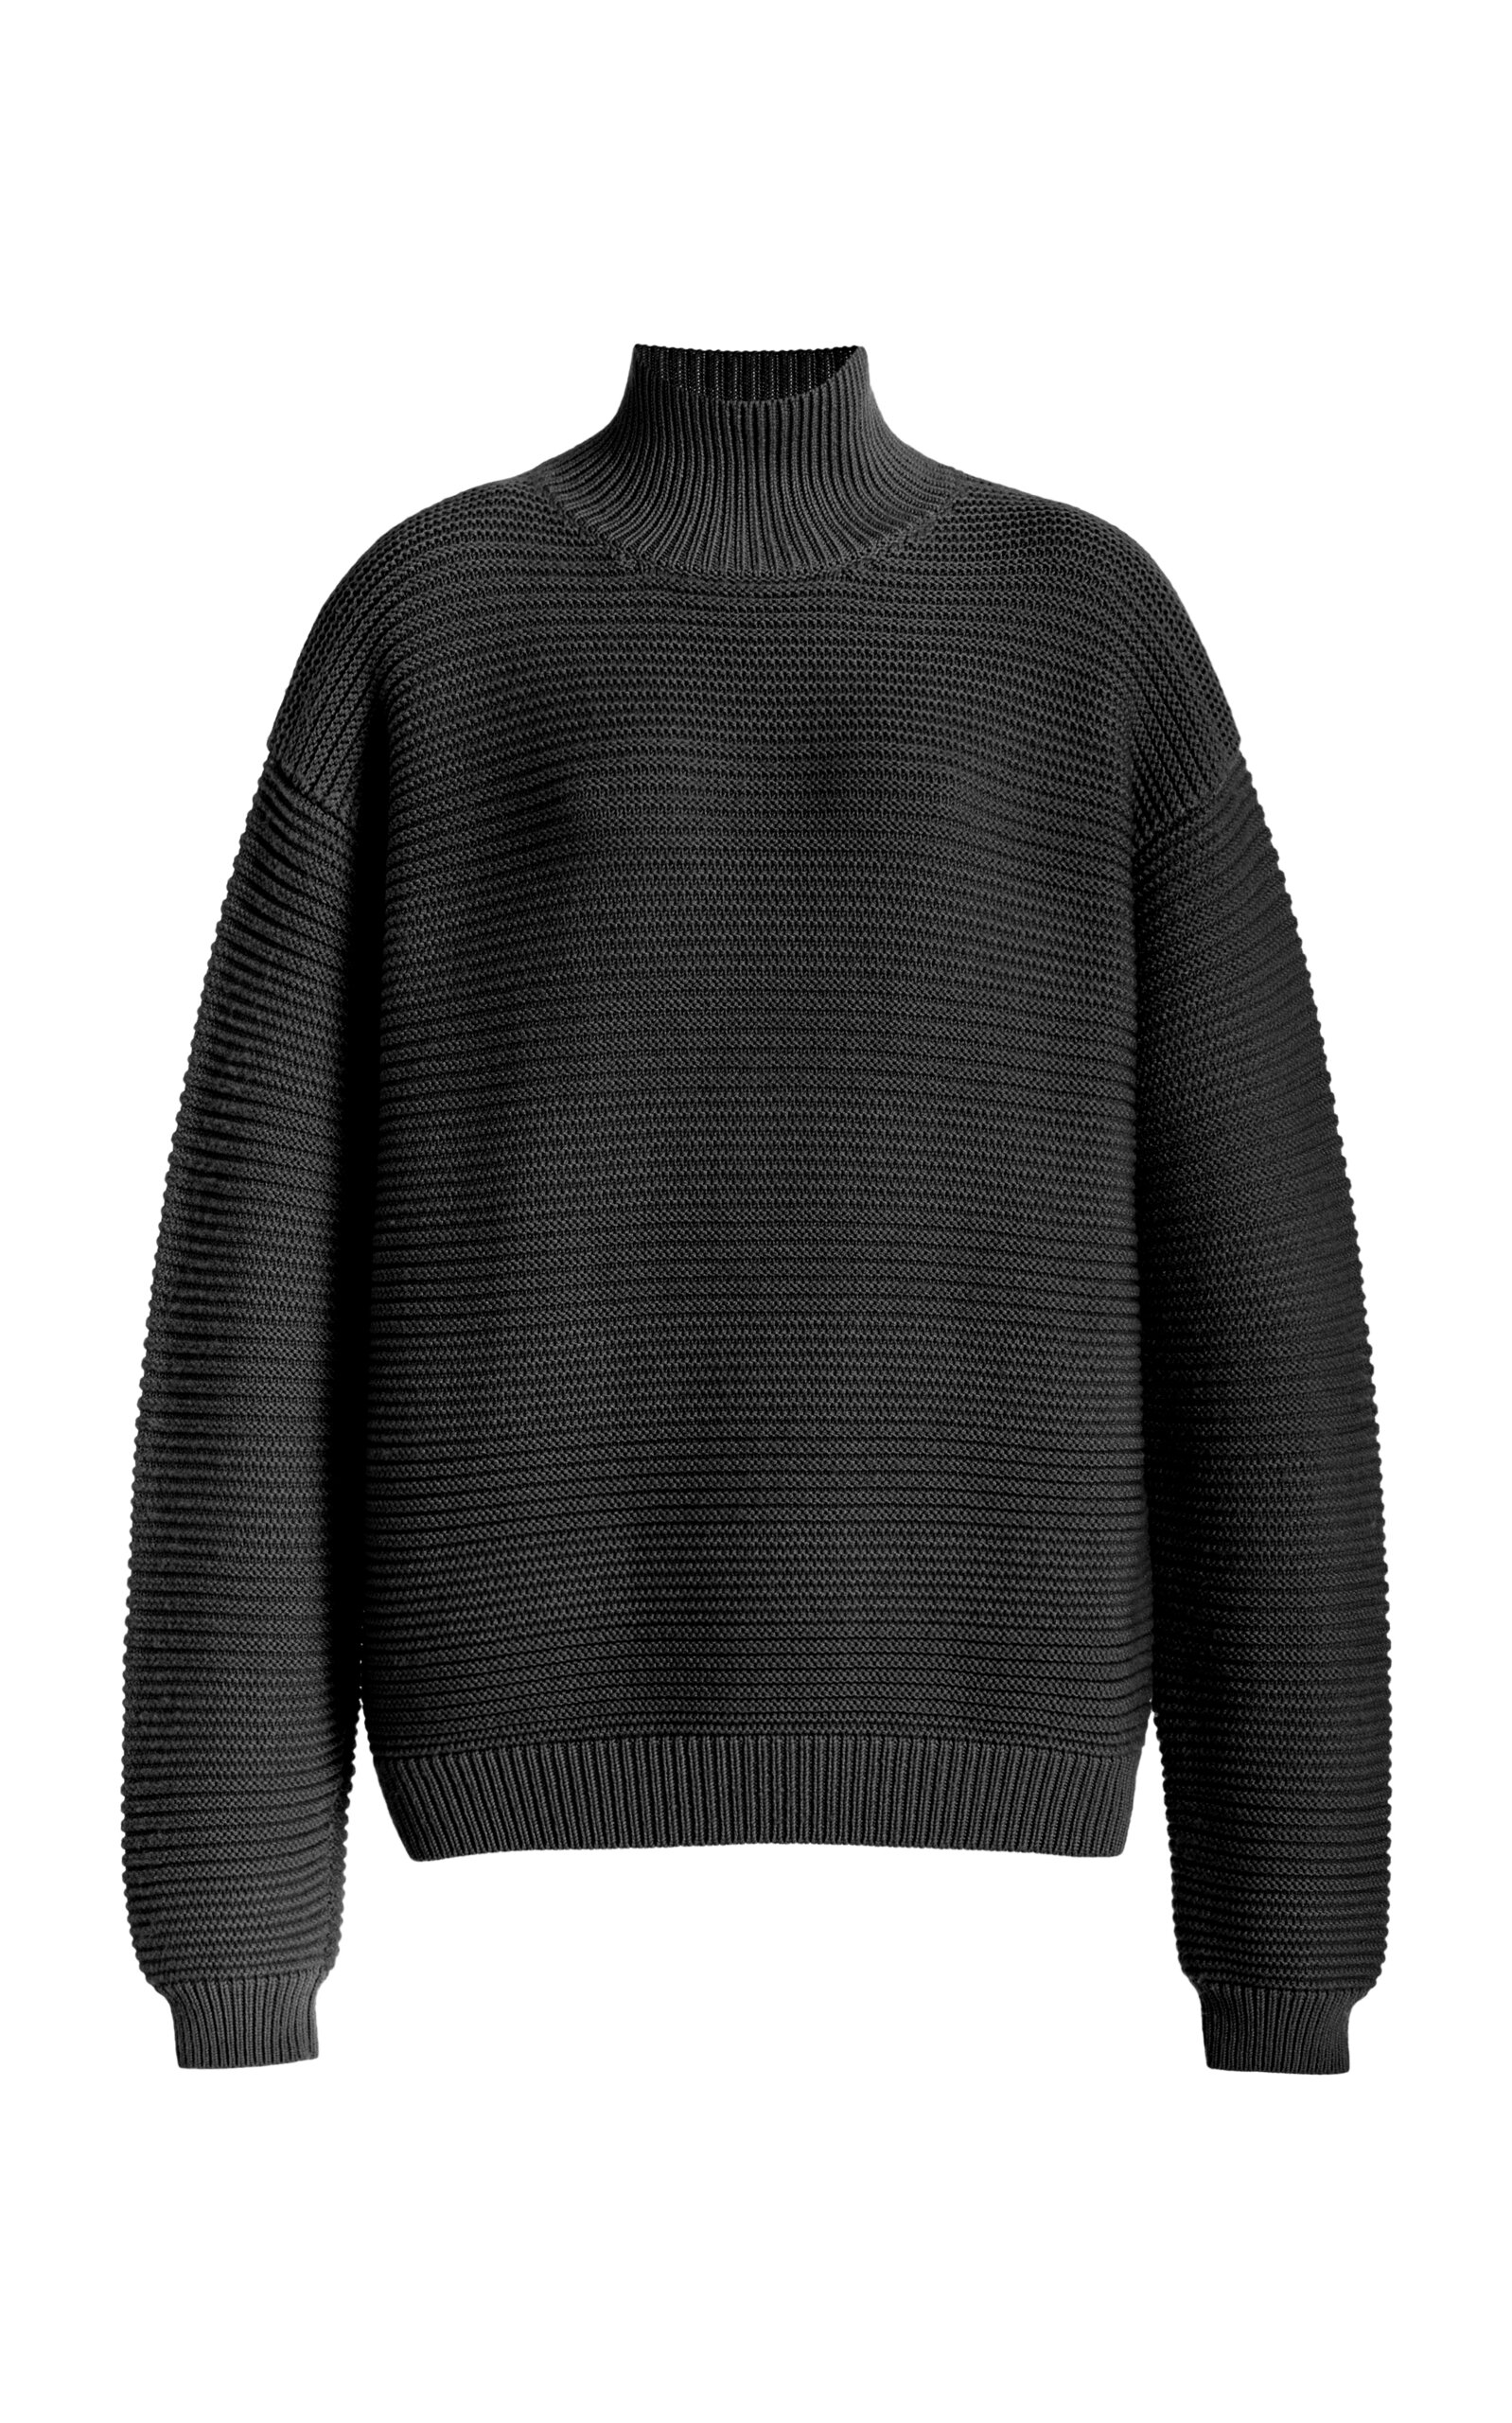 The Charlie Ribbed Knit Wool Sweater